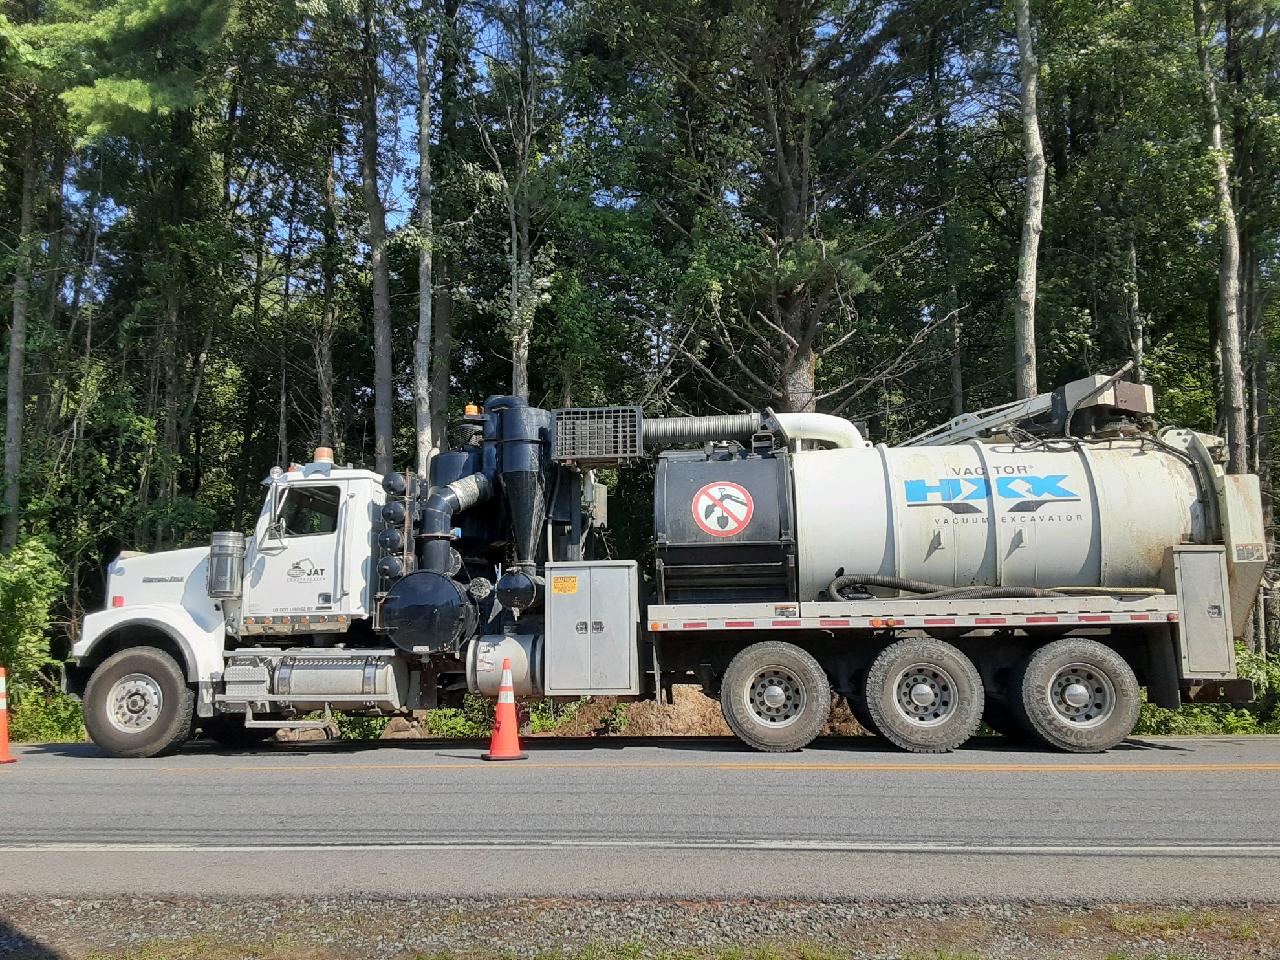 Hydrovac Excavation Clifton Park NY, expose existing utilities